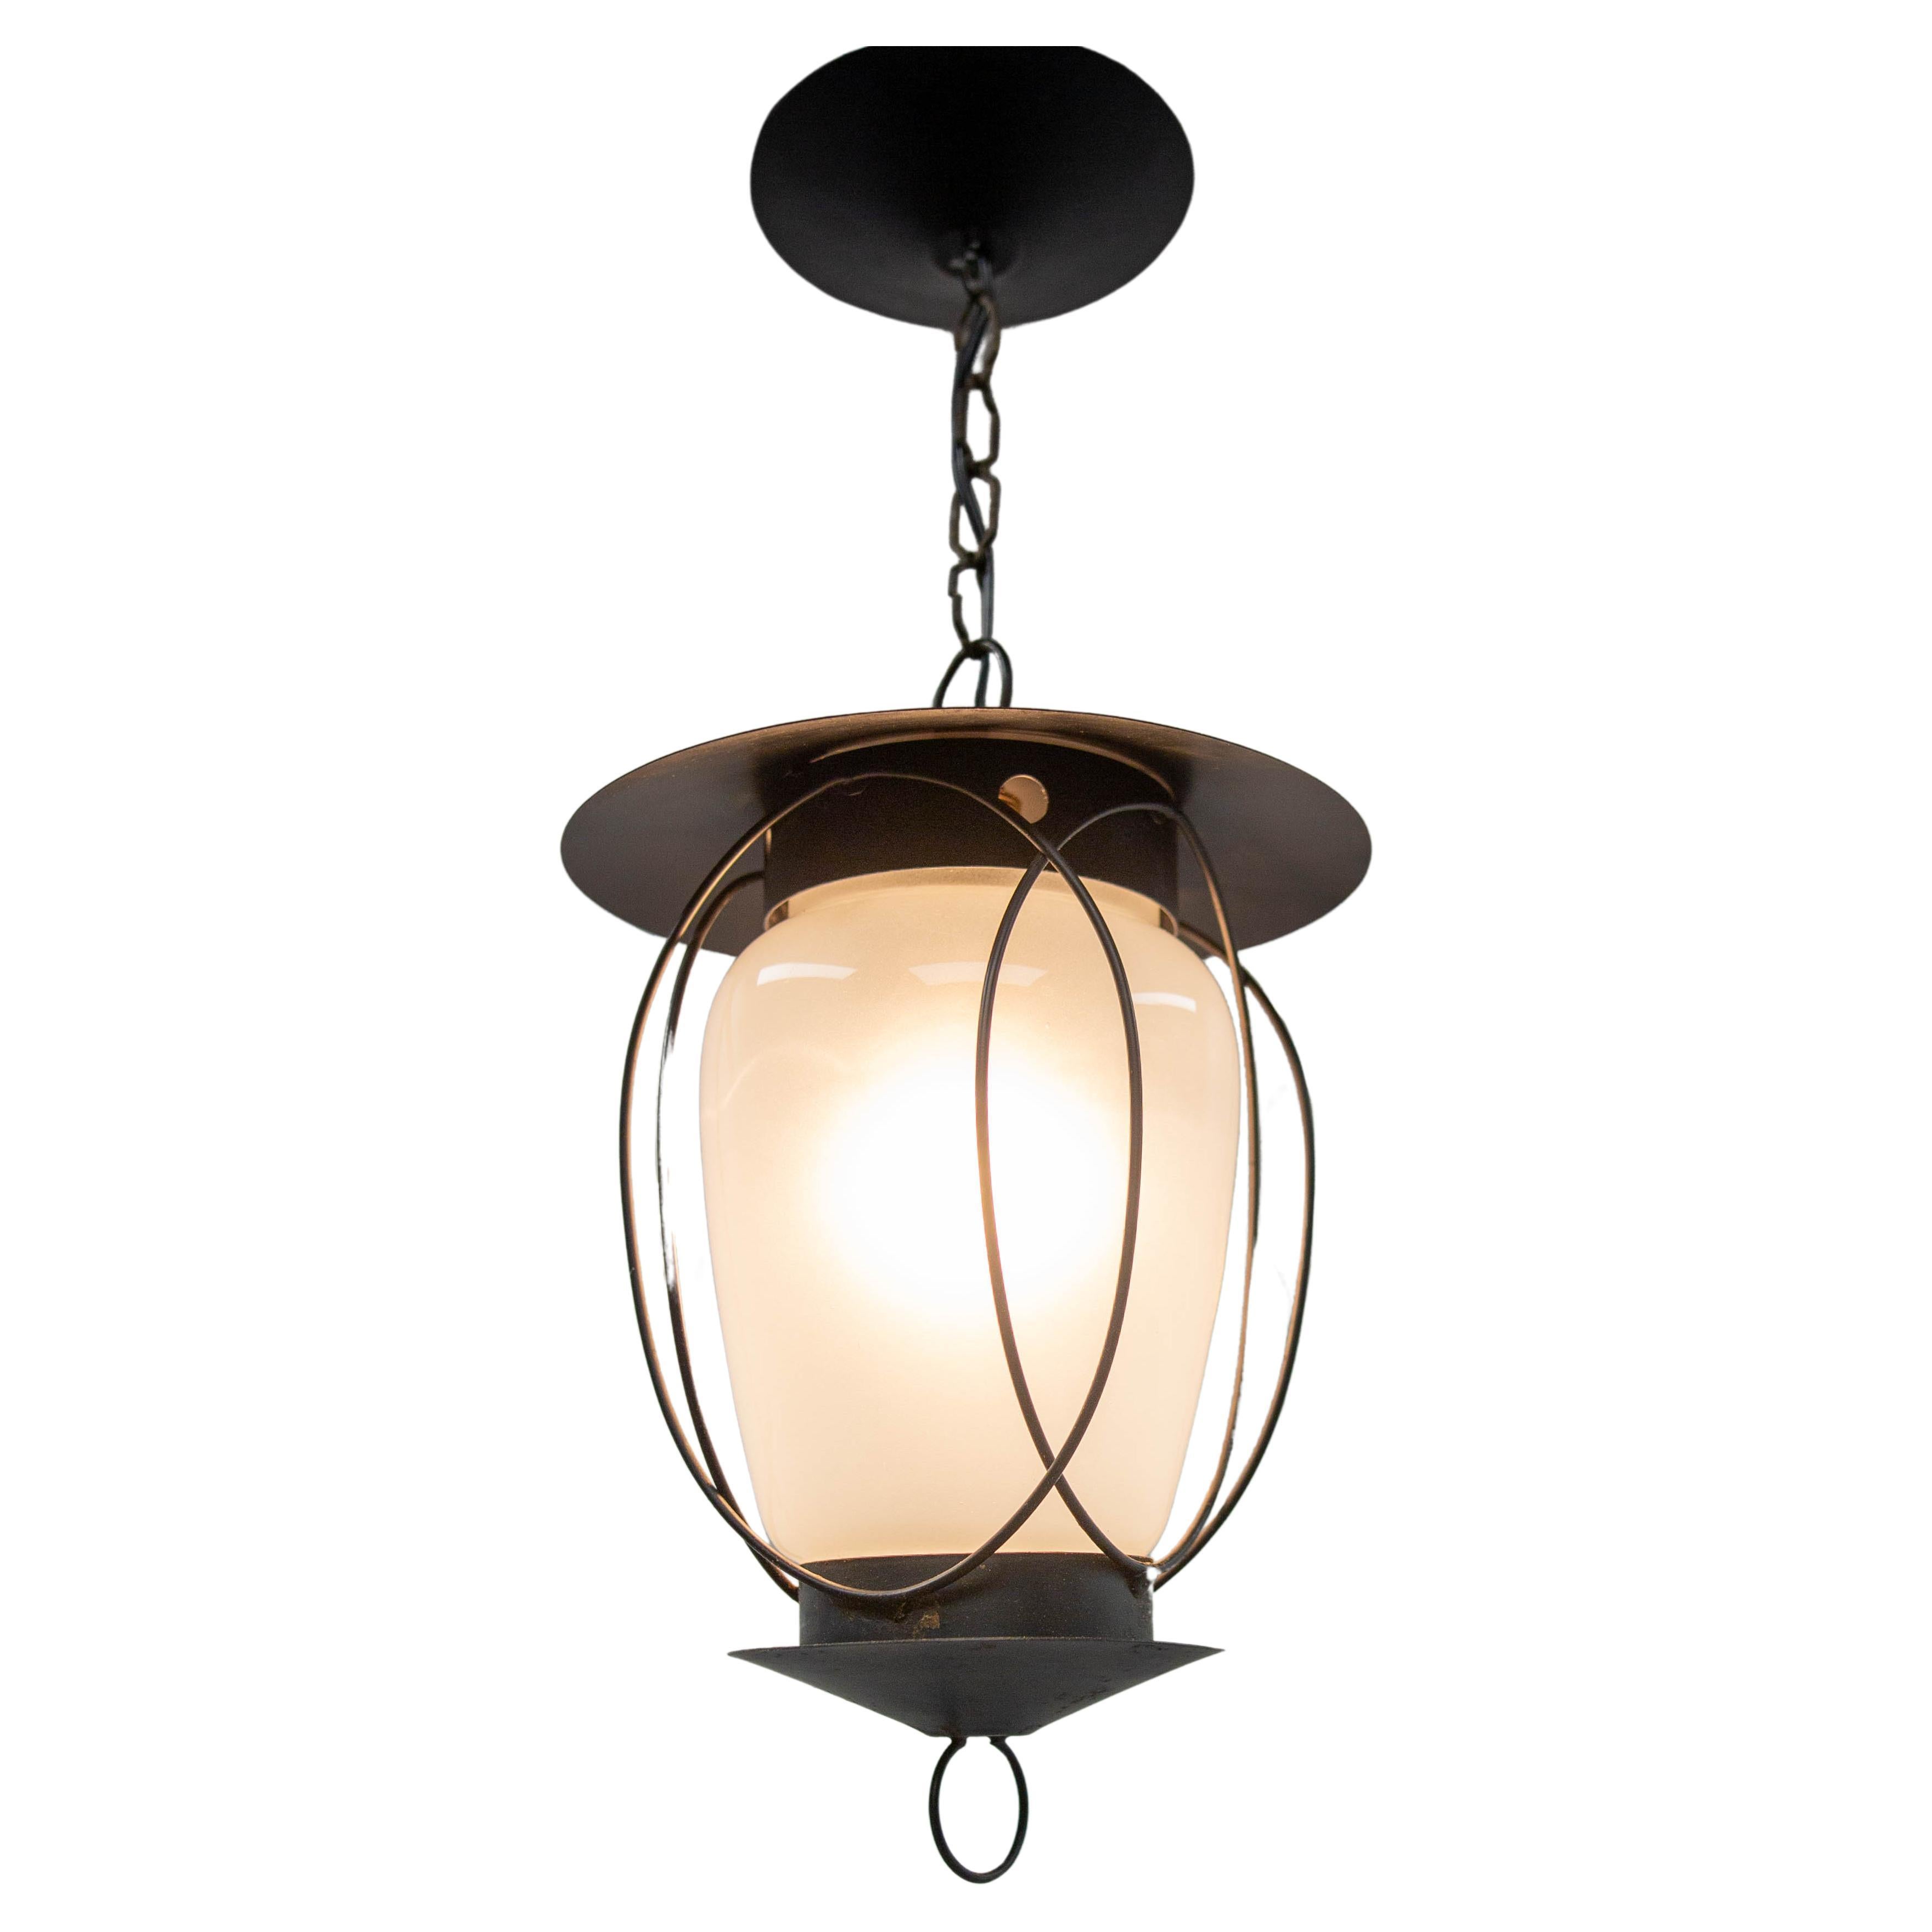 Ceiling pendant, France.
Lustre made in metal and glass.The glass is the original but it is like new.
Soft and pleasant lighting.
Its large size makes it ideal lighting and decoration for a large room or patio
This chandelier is conform to USA and